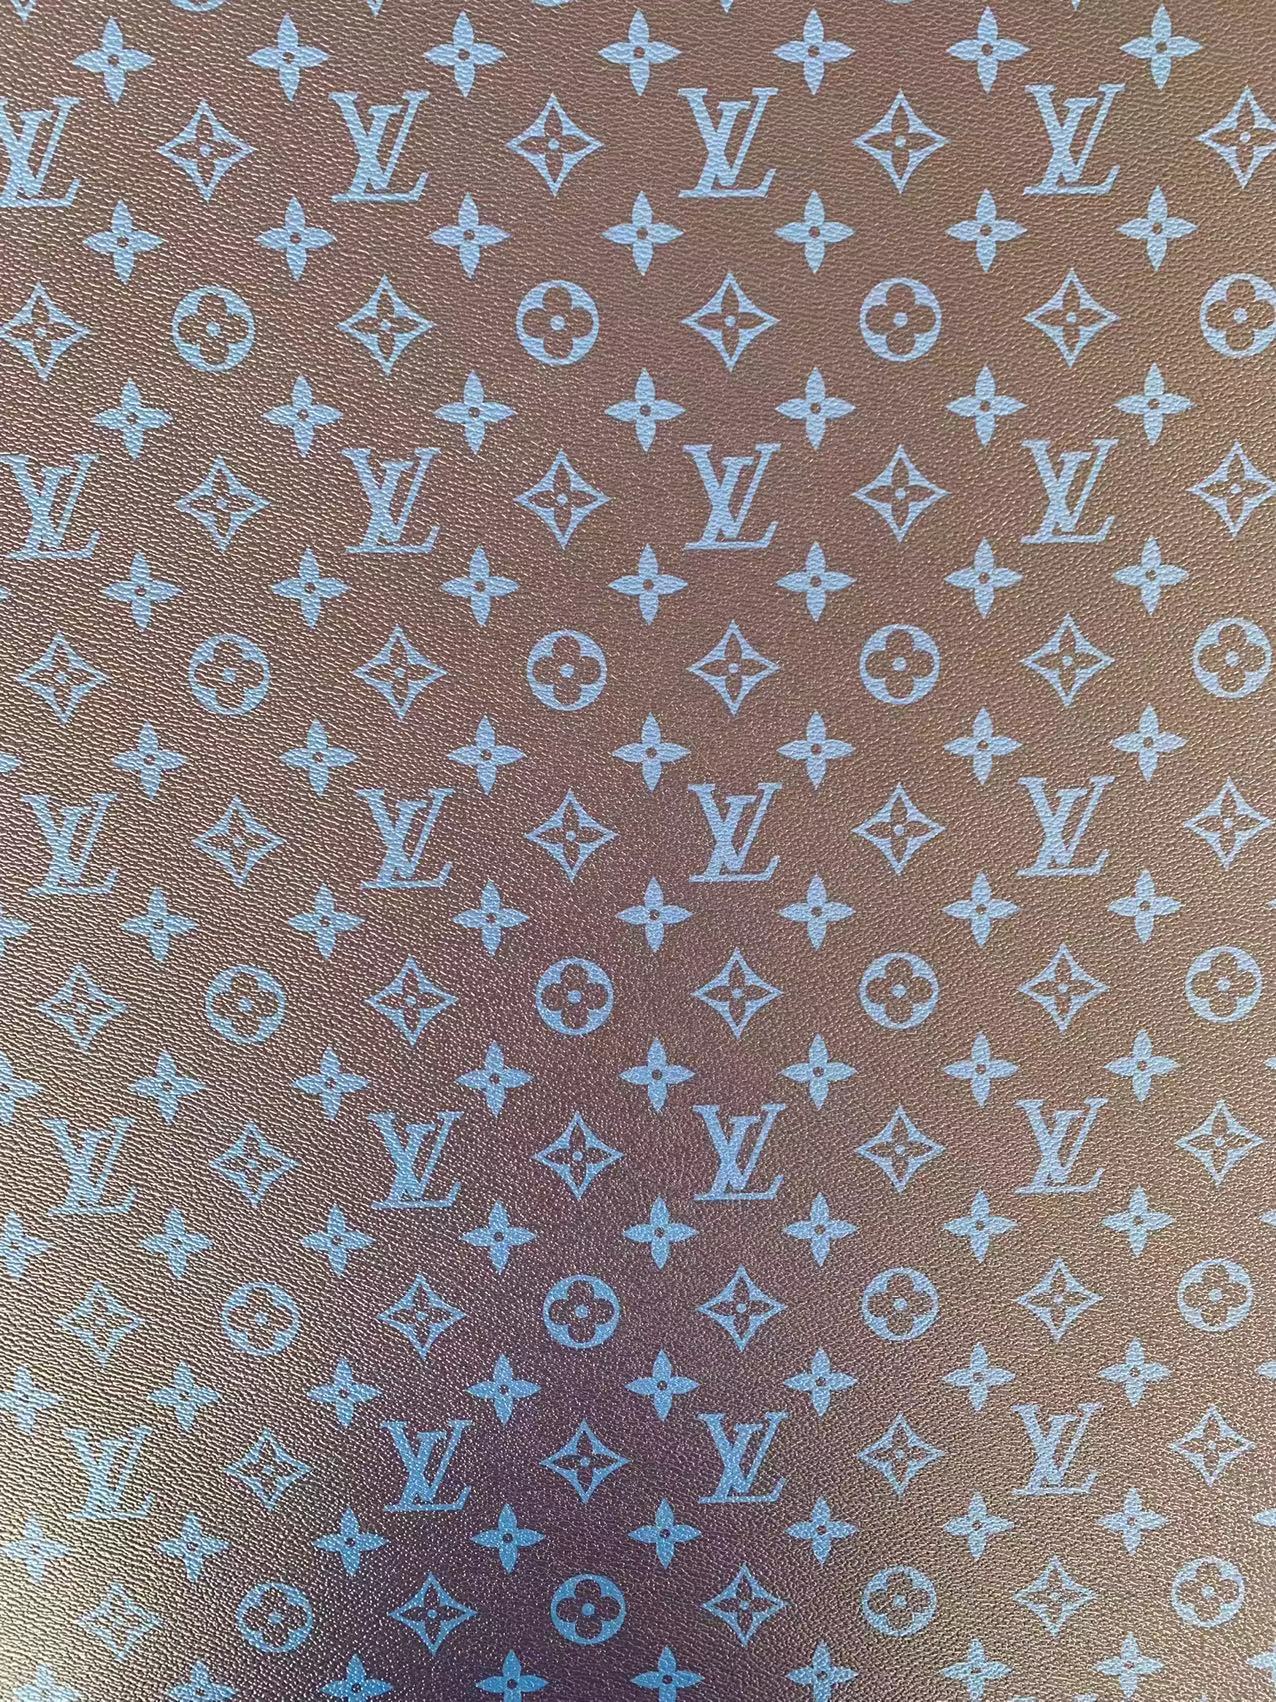 Classic LV vinyl crafting leather fabric for bag leather, shoe